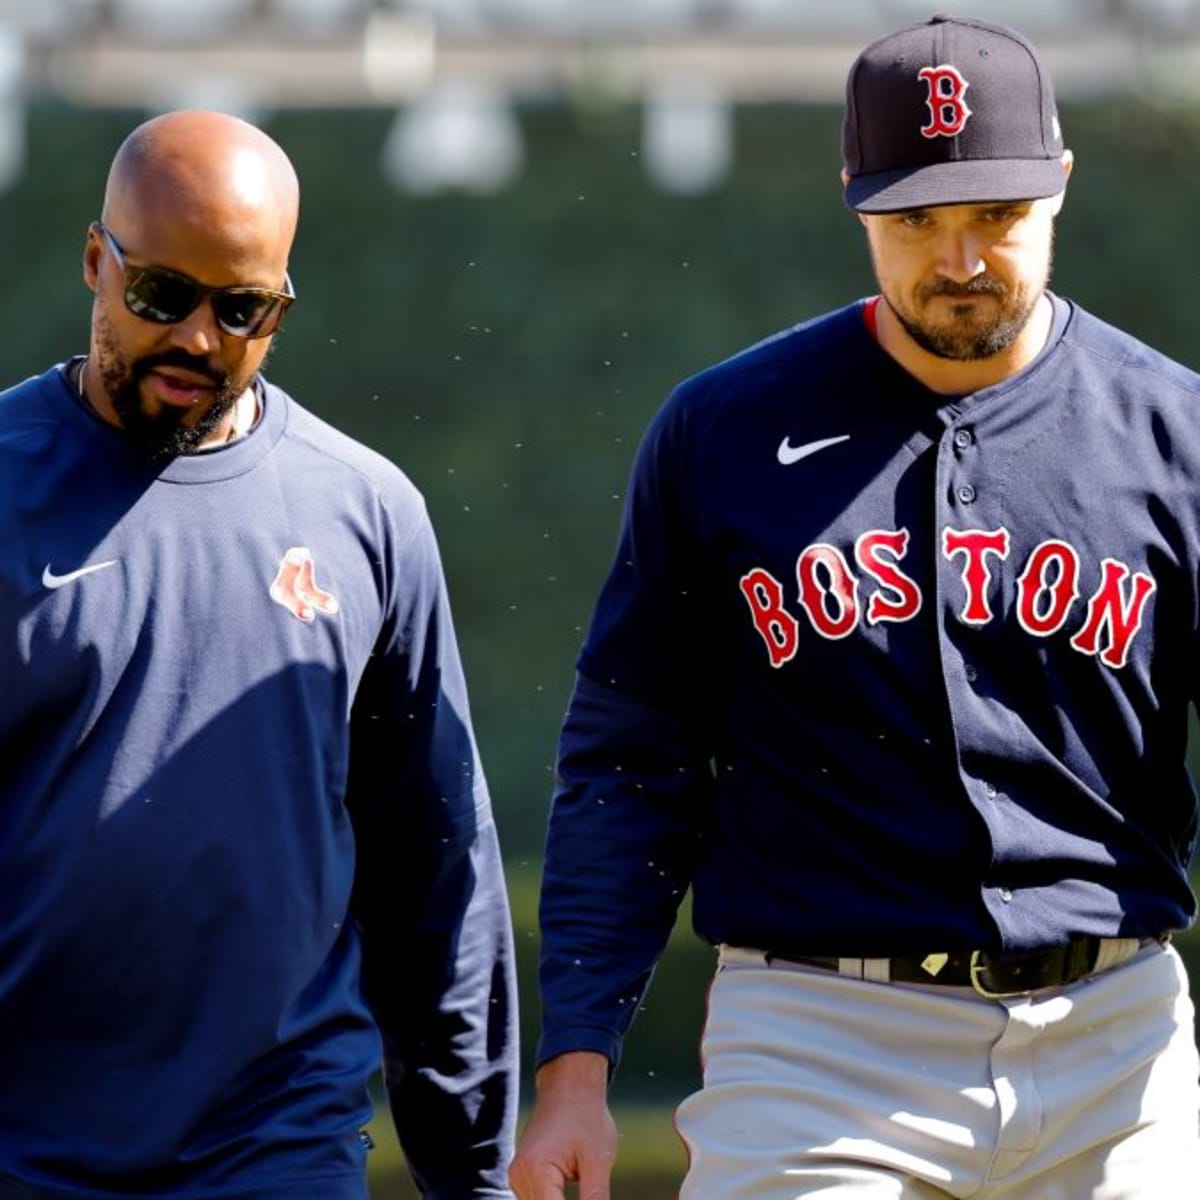 New Red Sox outfielder Adam Duvall looks well-suited to Fenway